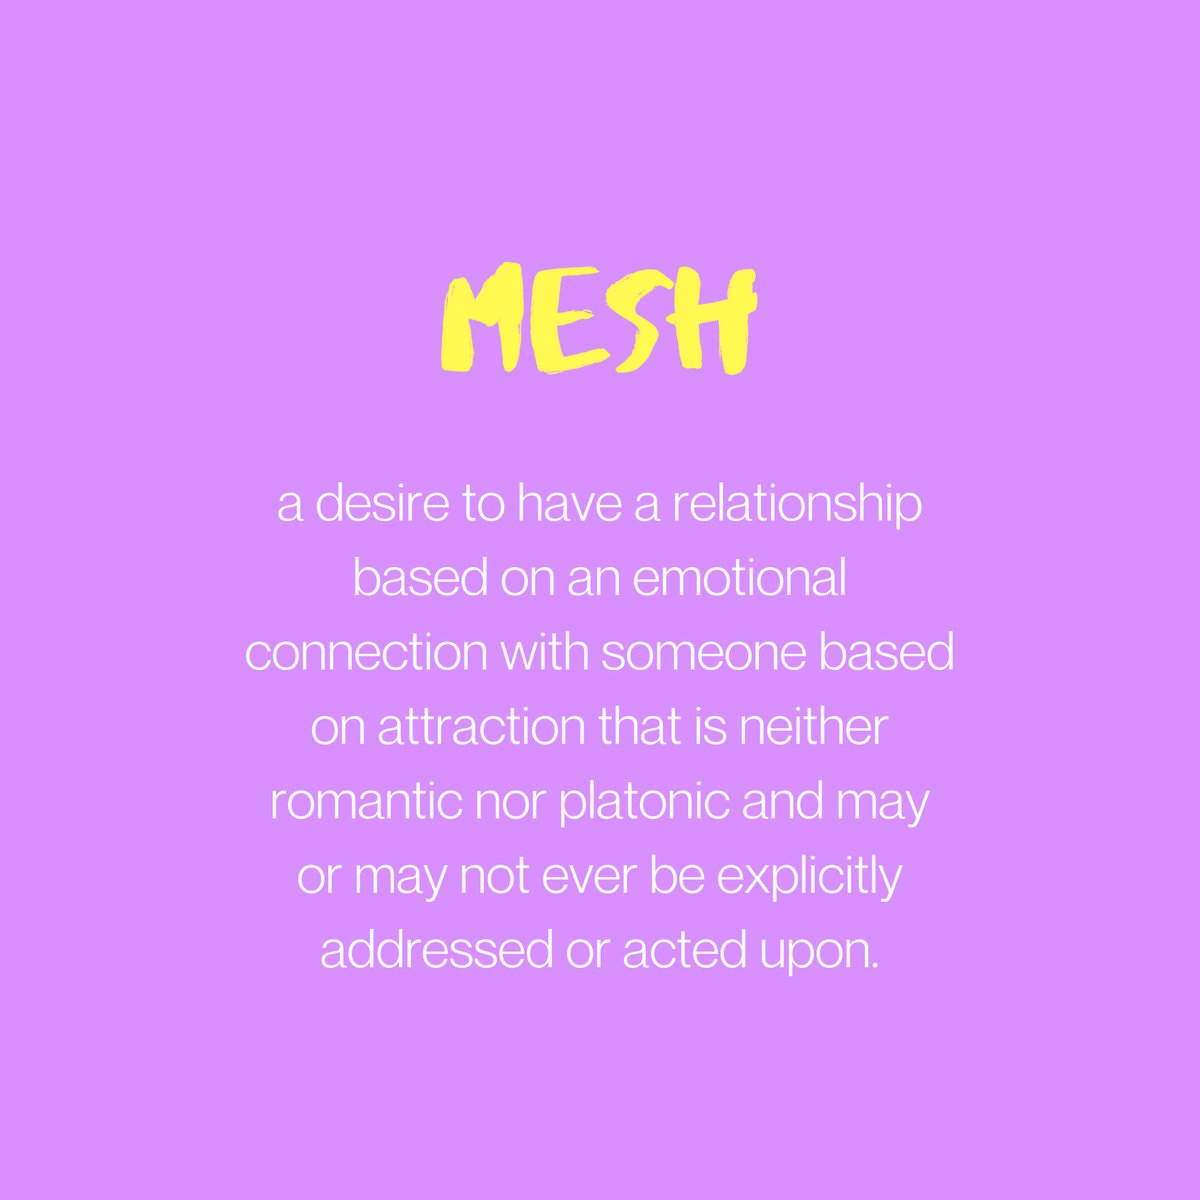 MESH: a desire to have a relationship based on an emotional connection with someone based on attraction that is neither romantic nor platonic. may or may not ever be explicitly addressed or acted upon.